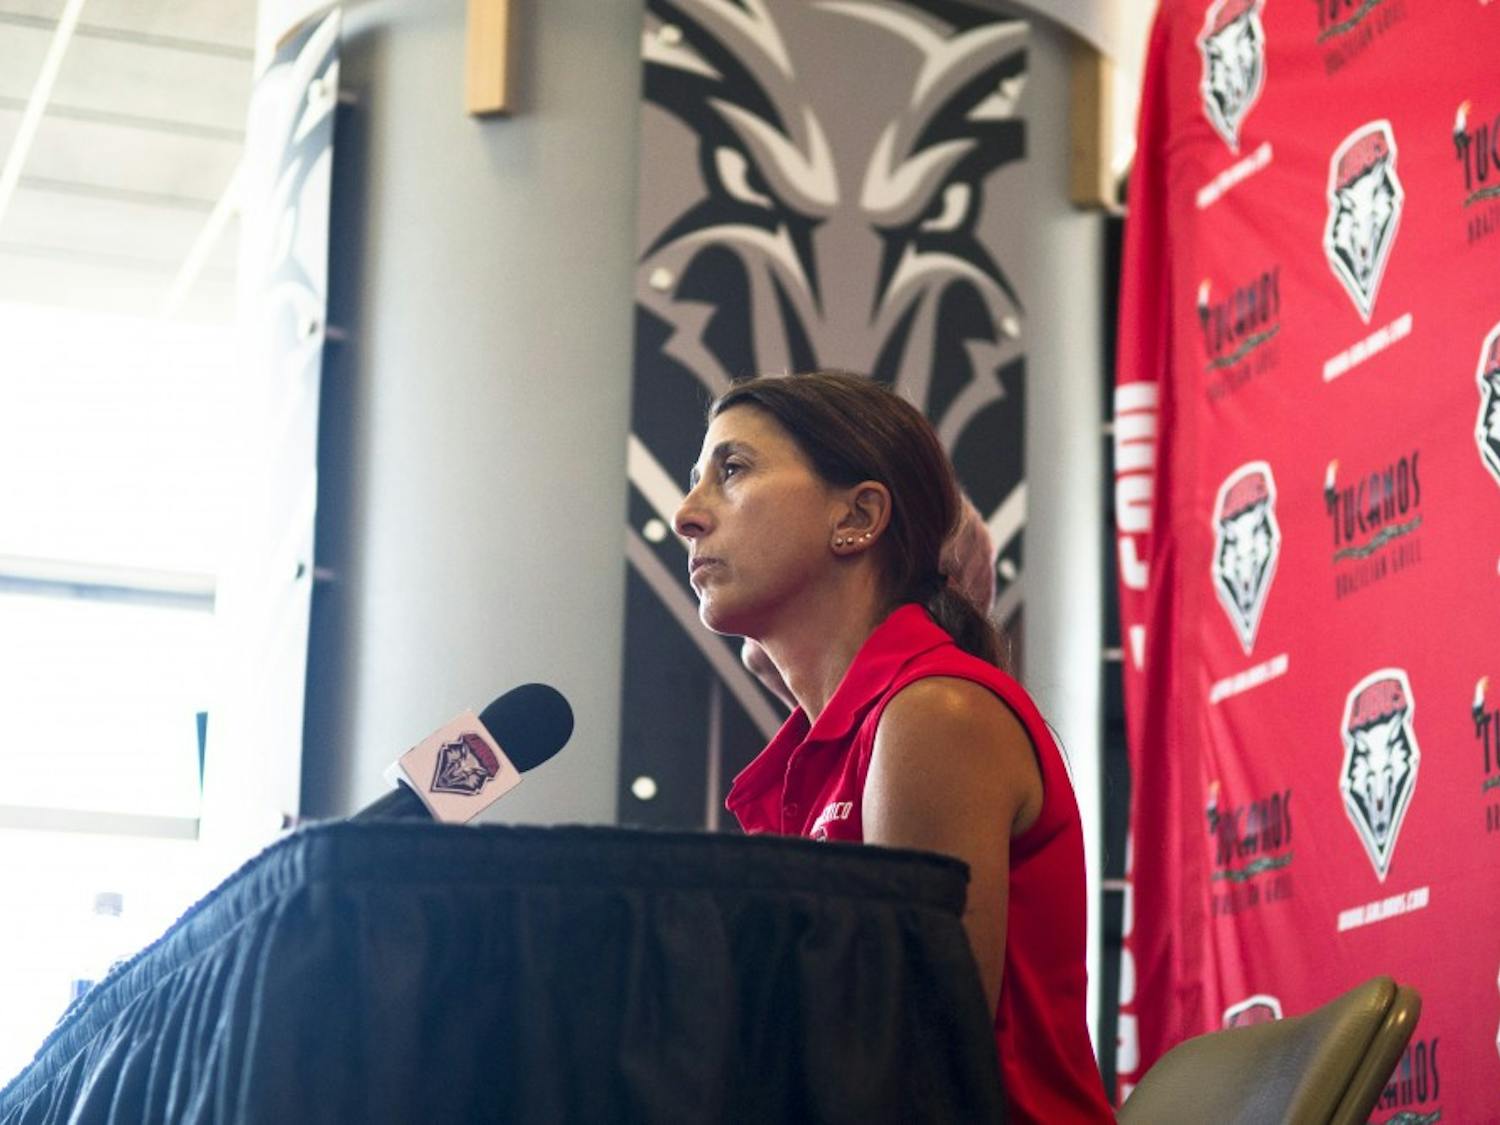 New Mexico women’s soccer head coach Kit Vela answers questions from the media at the Tow Diehm Athletics Center on Aug. 20. UNM announced on Thursday that it will not retain Vela for the 2015 season.